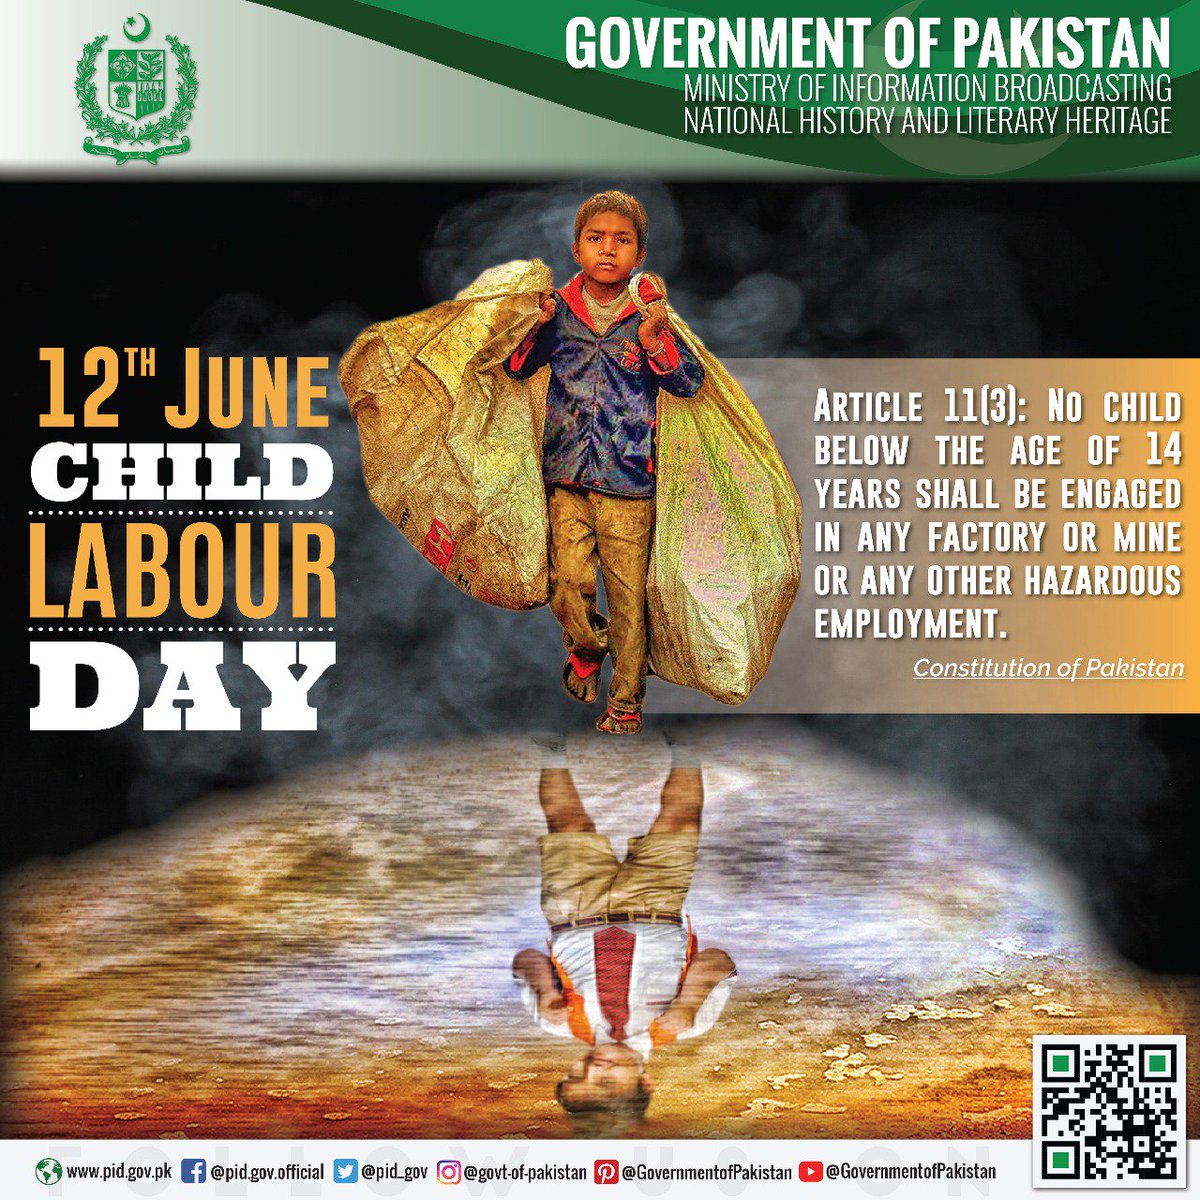 Government Of Pakistan على تويتر Every Year The World Day Against Child Labour Is Observed On June 12 To Raise Awareness About The Plight Of Child Labourers Worldwide Hundreds Of Millions Of